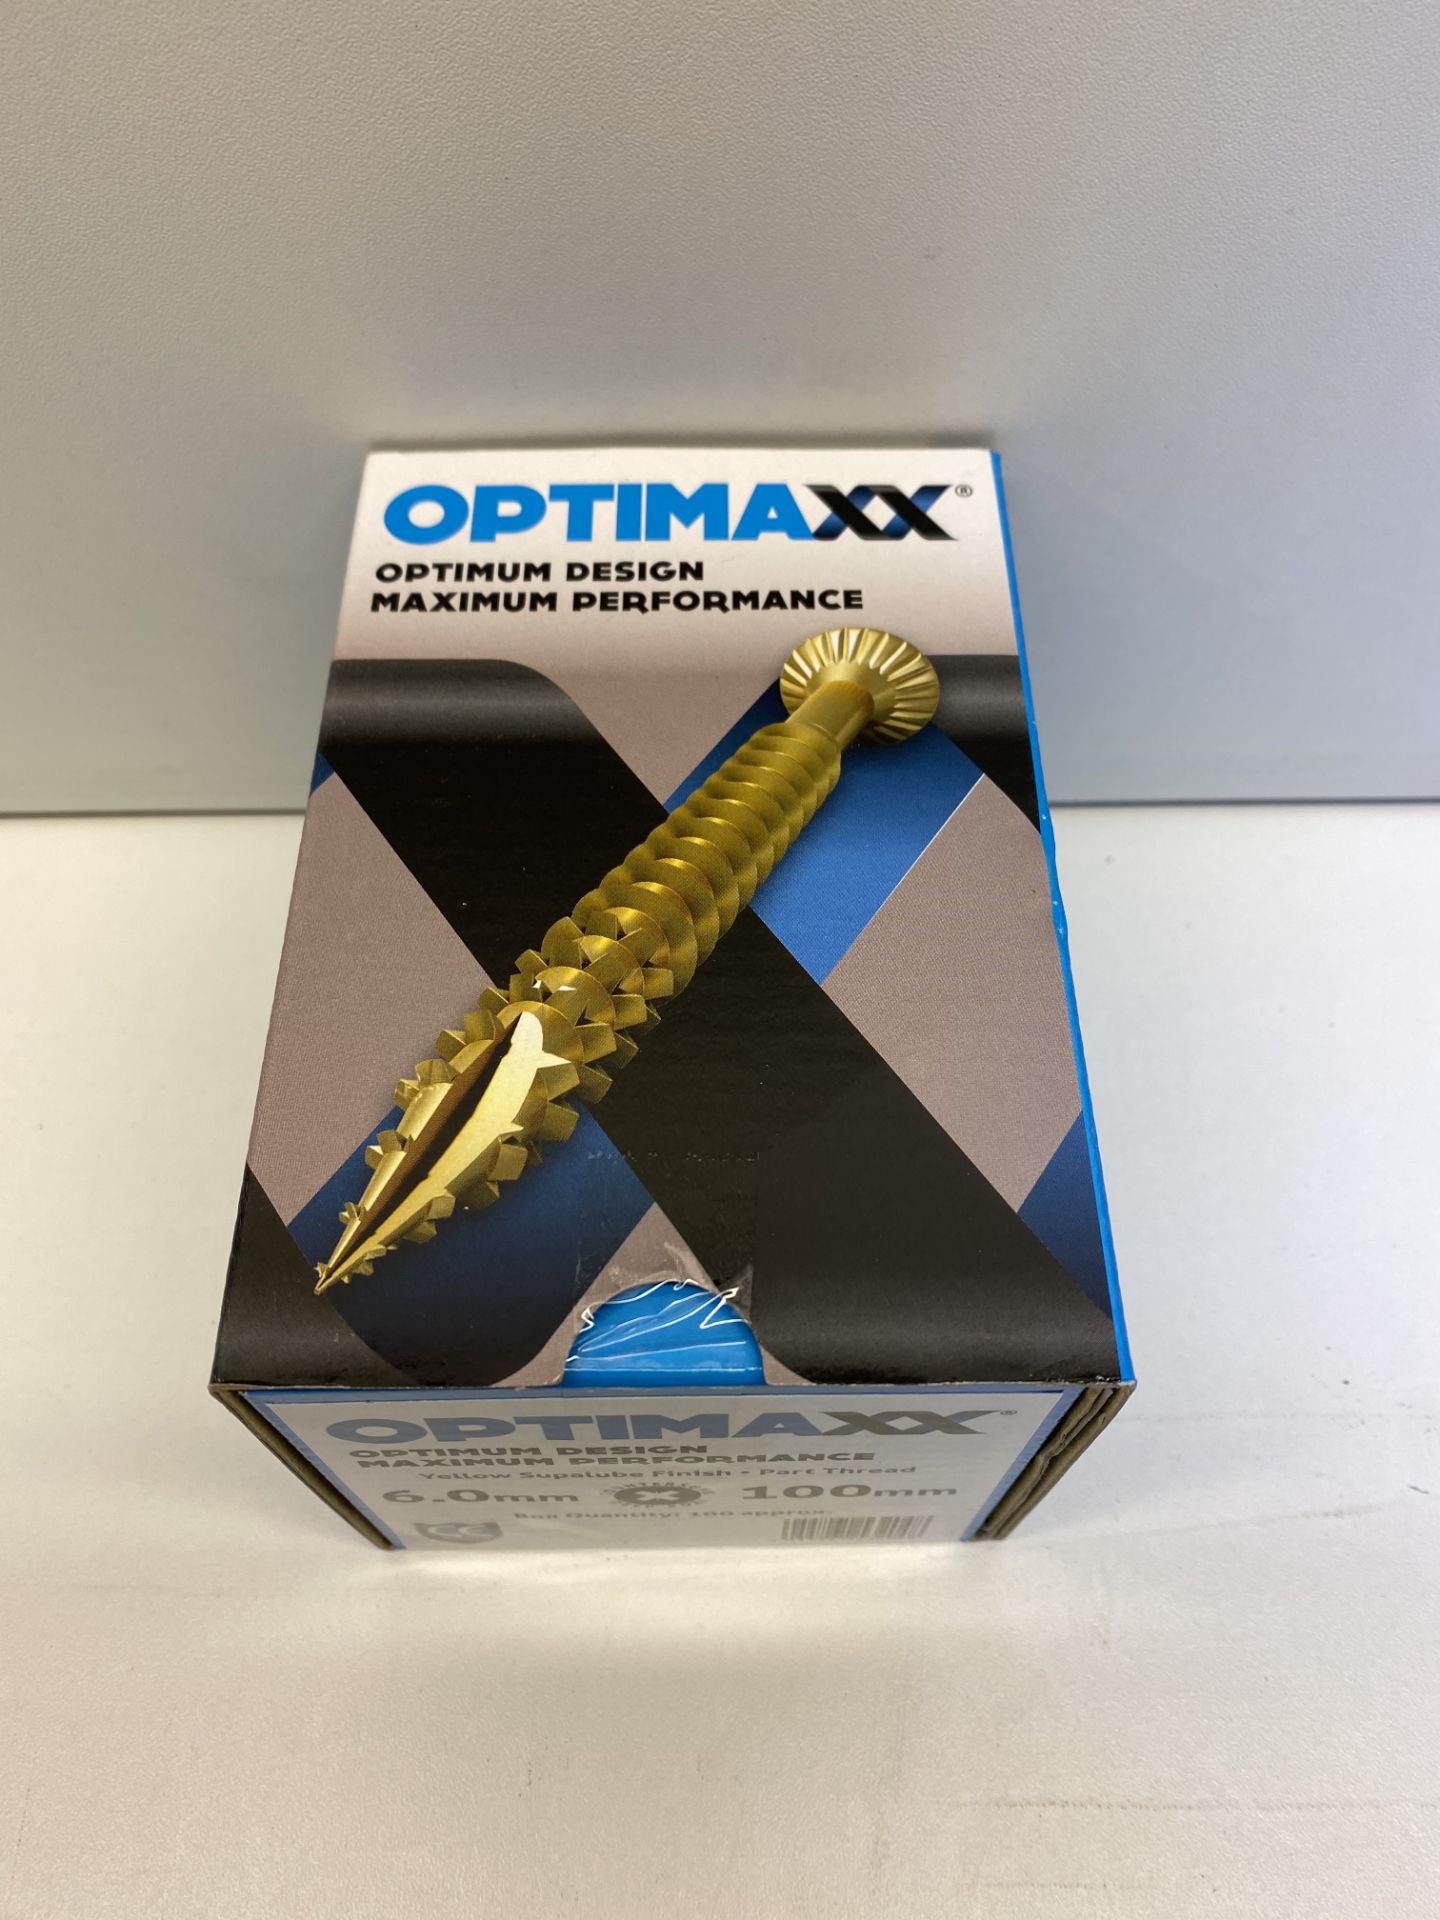 Optimaxx Wood Screw Selection in Case + Tape Measure - Image 5 of 12